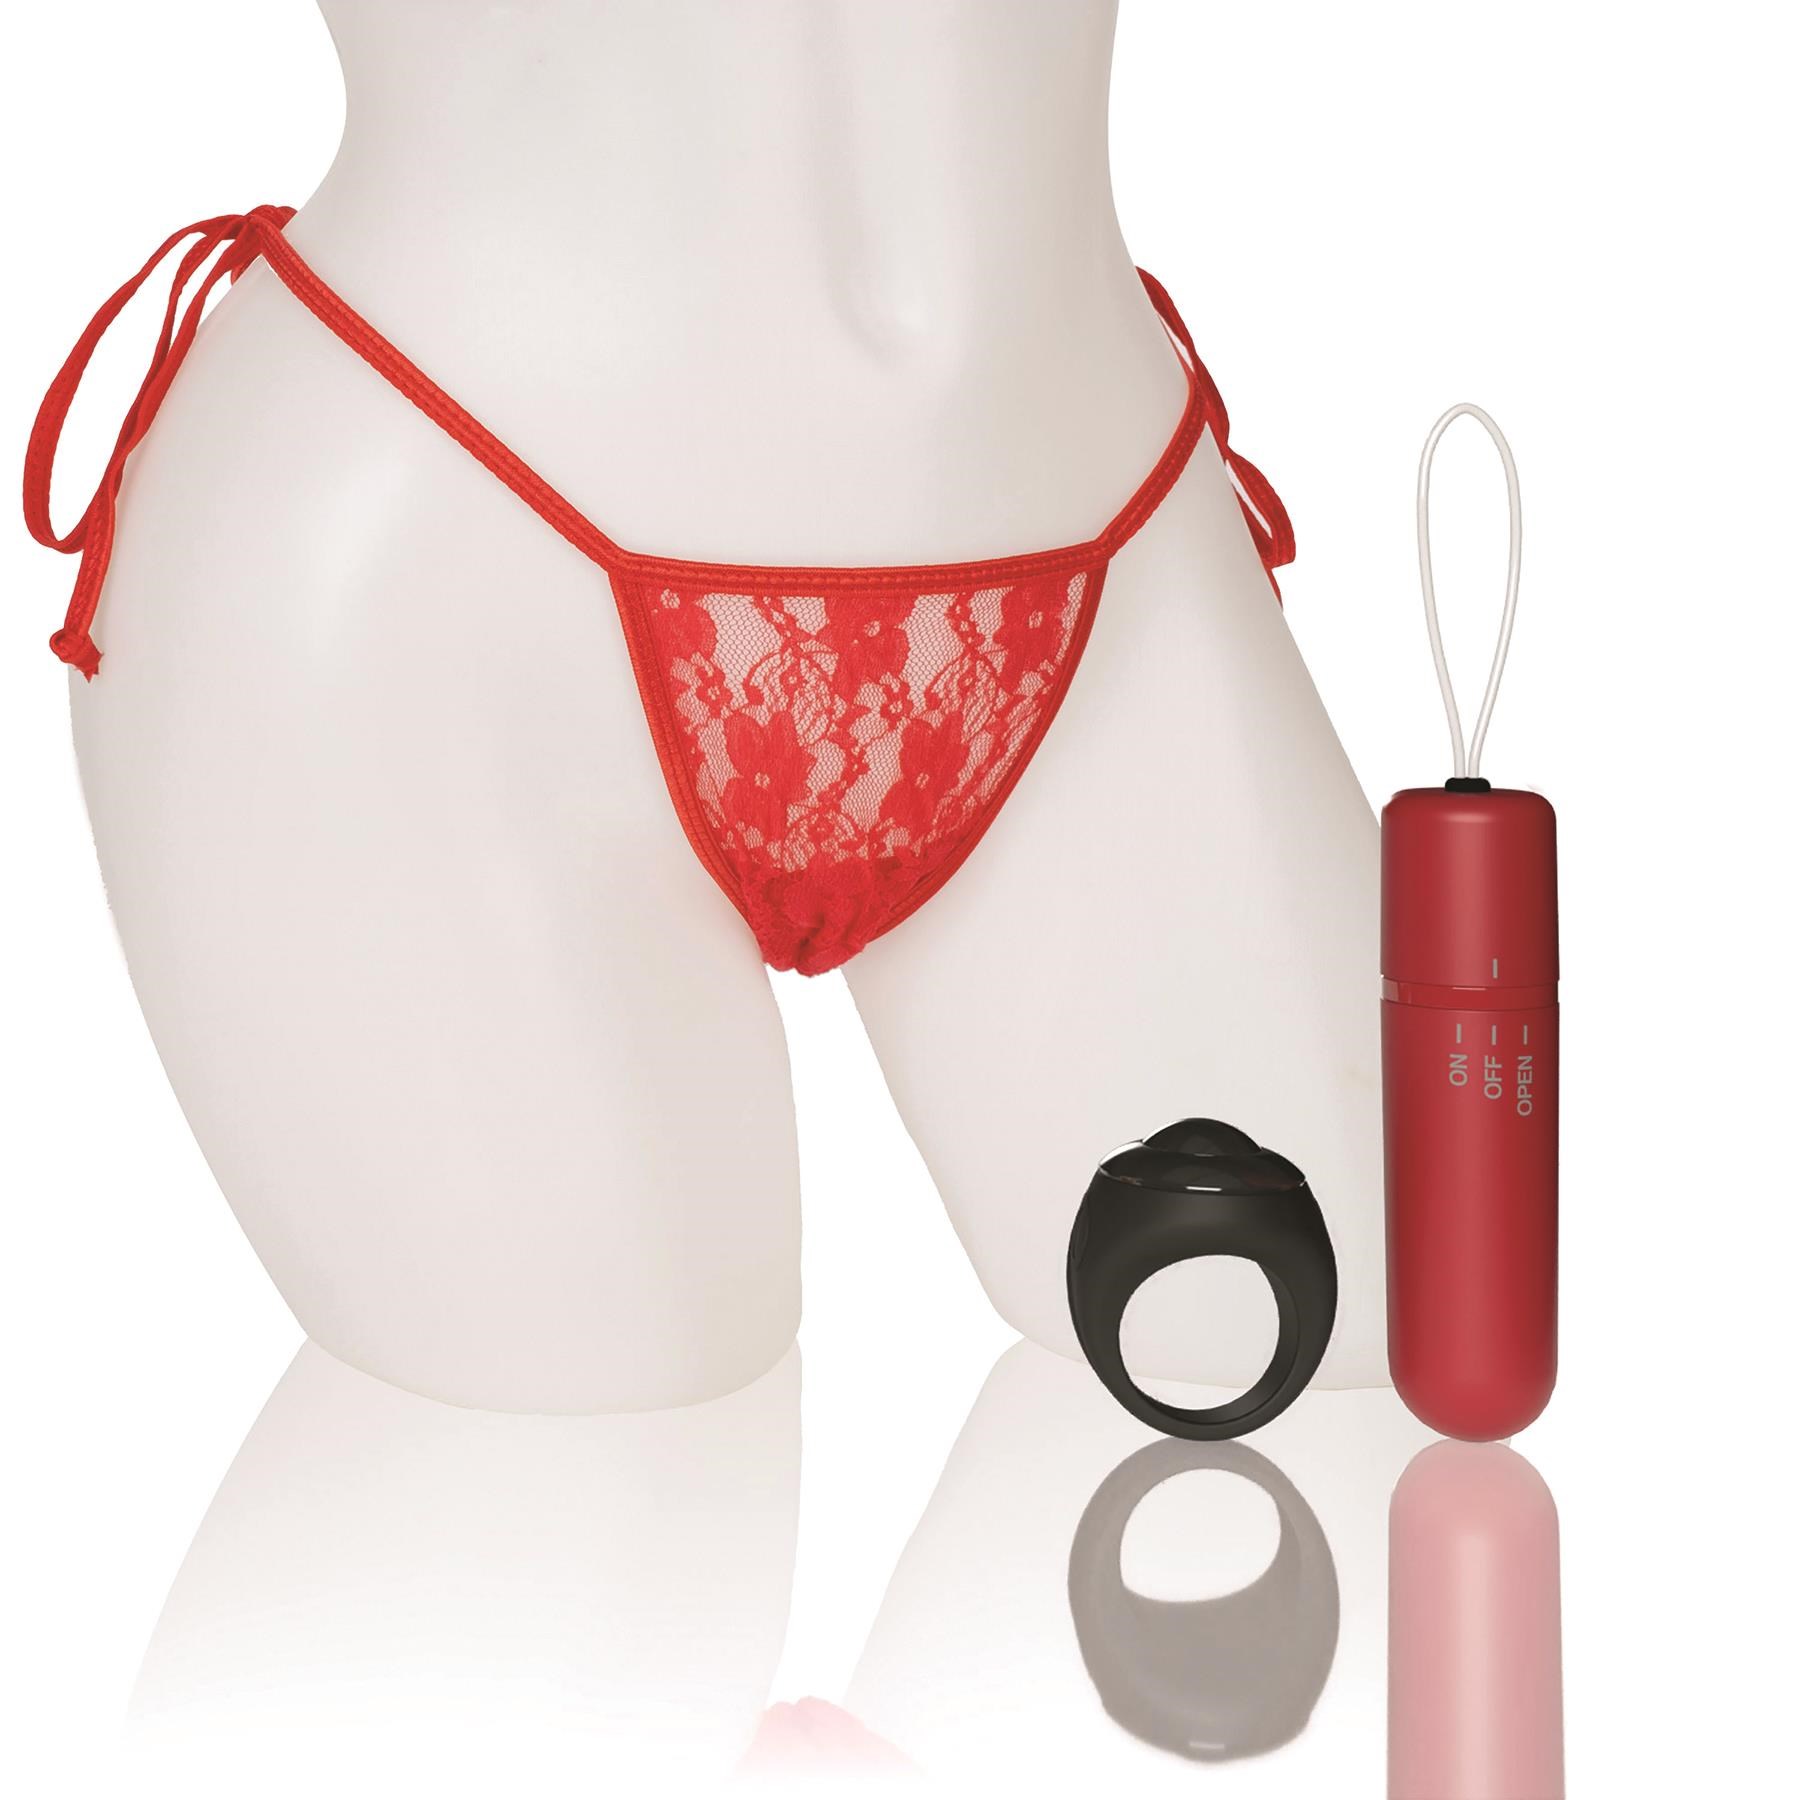 Screaming O Remote Control Vibrating Panty Set - Product and Panty - Red